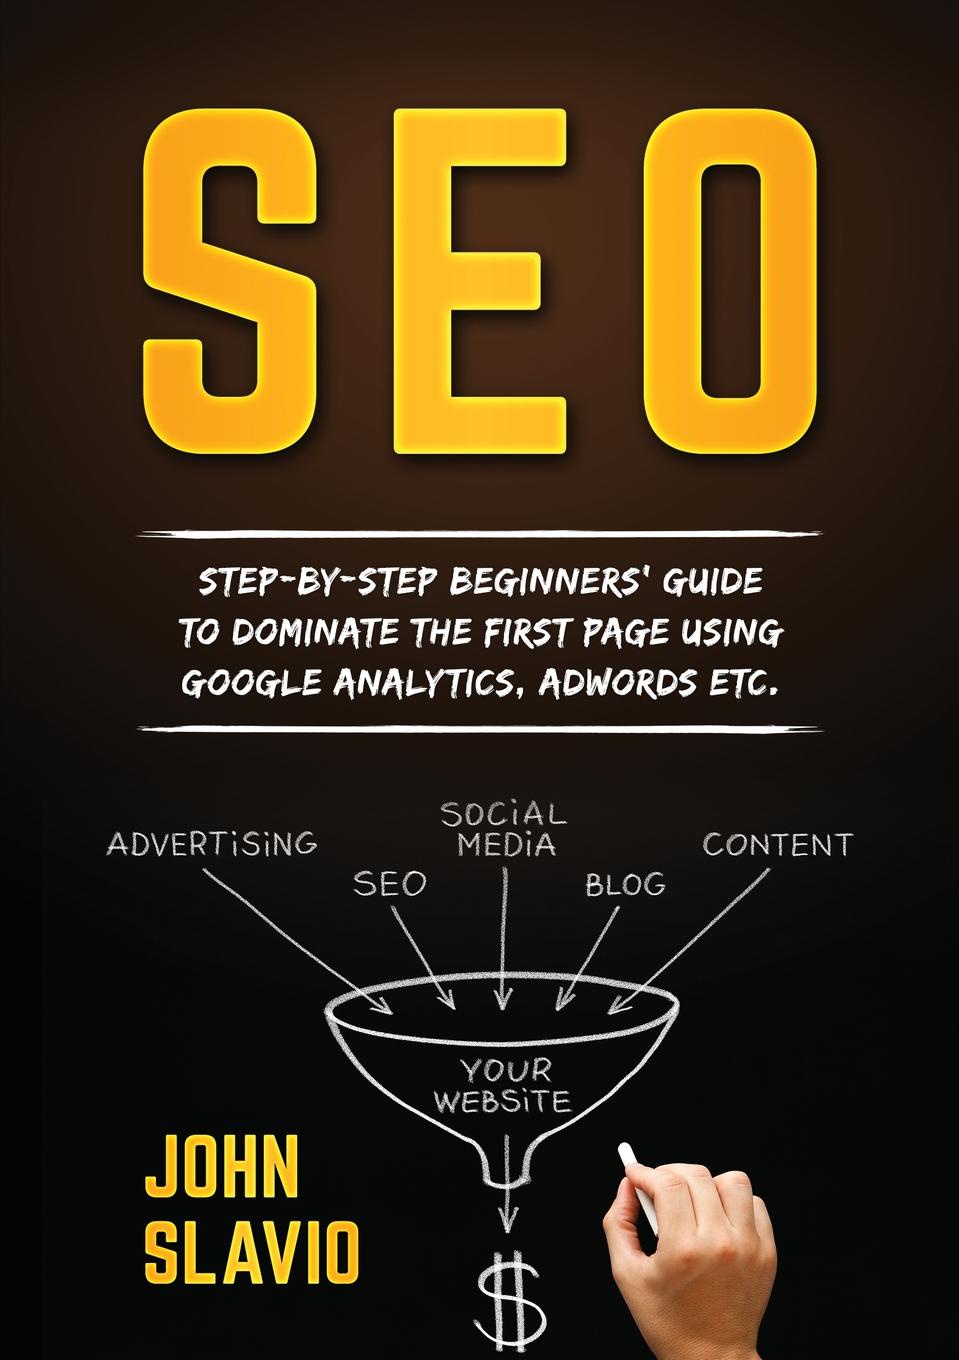 SEO. Step-by-step beginners` guide to dominate the first page using Google Analytics, Adwords etc.